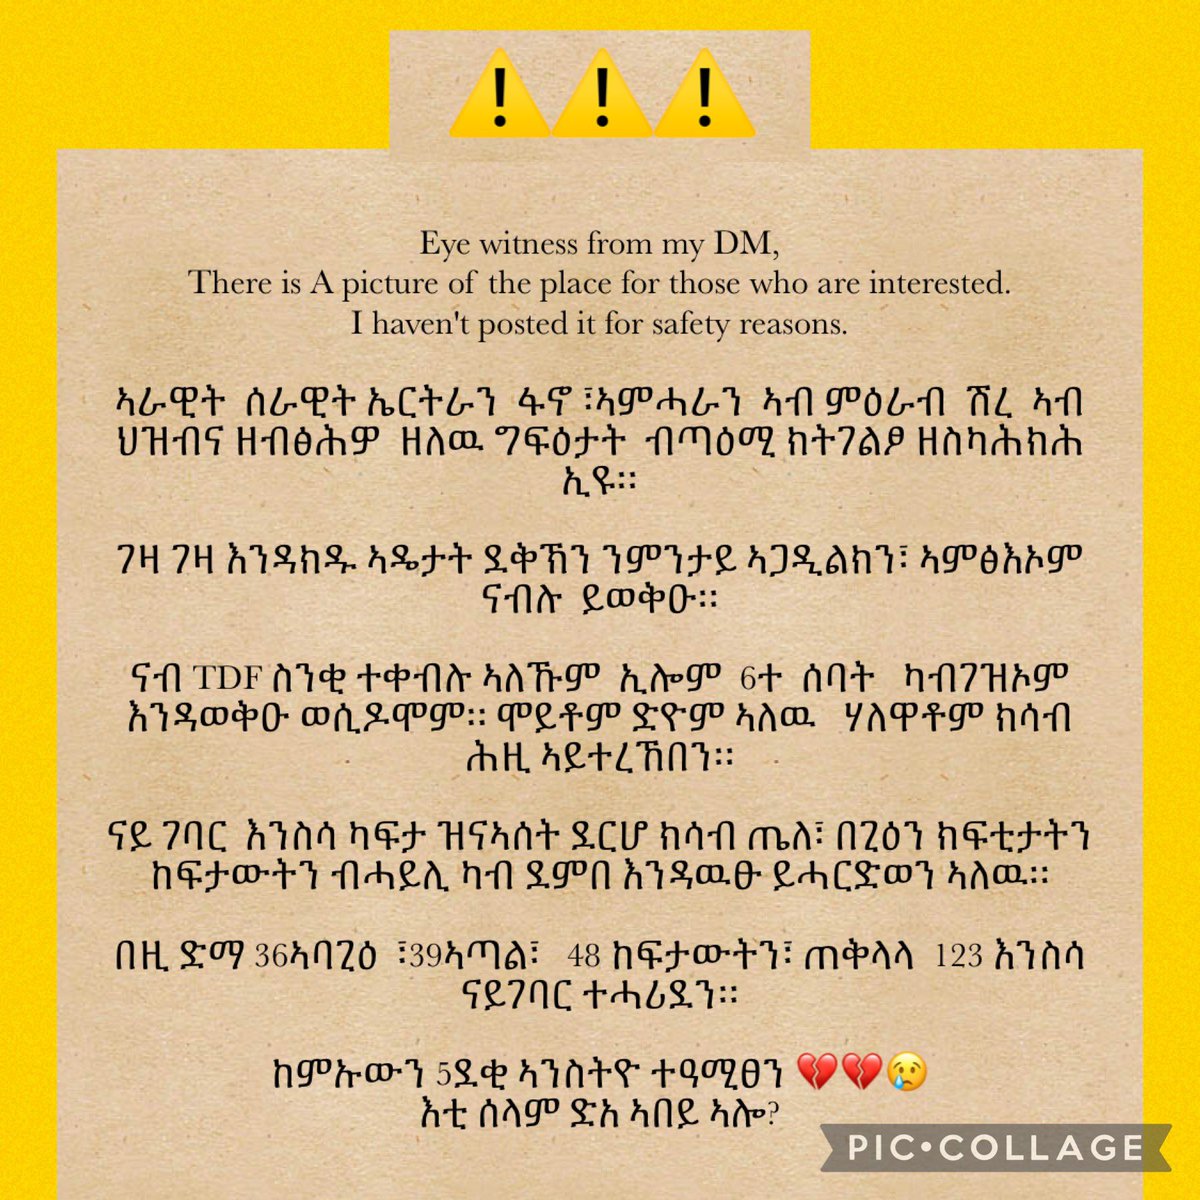 🕸🇪🇷/n army and FANO, Amhara in Shire, beat six people from their homes and took them away, saying they were receiving provisions to TDF. Whether they are dead or their whereabouts are still unknown. #EritreaOutOfTigray #AmharaOutOfTigray @mbachelet @hiwan_gal